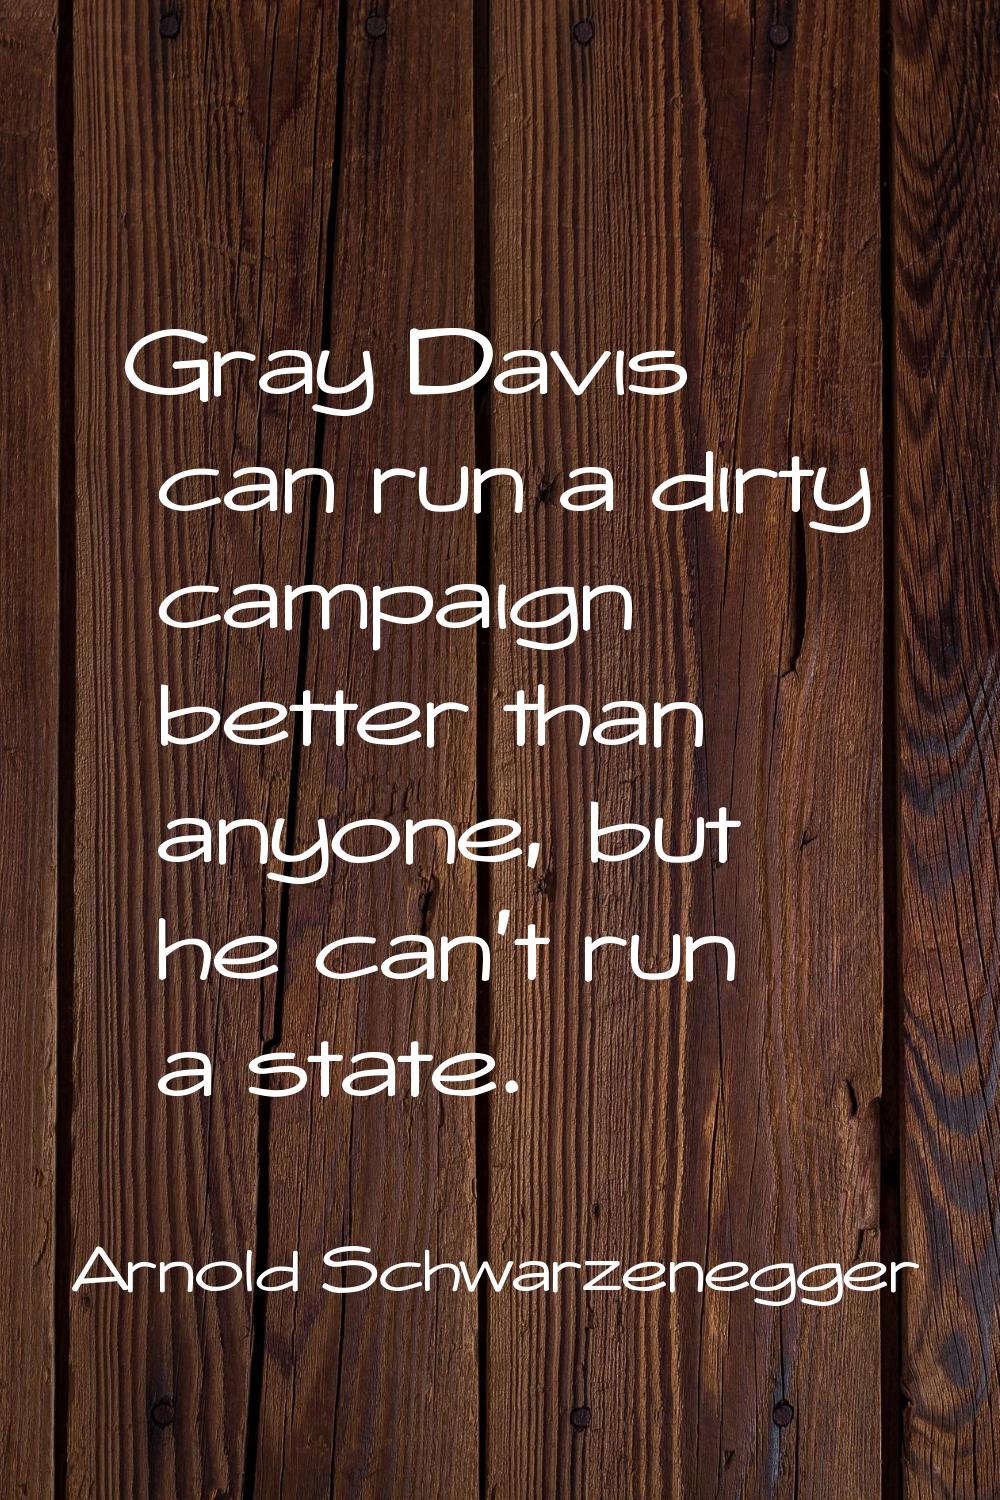 Gray Davis can run a dirty campaign better than anyone, but he can't run a state.